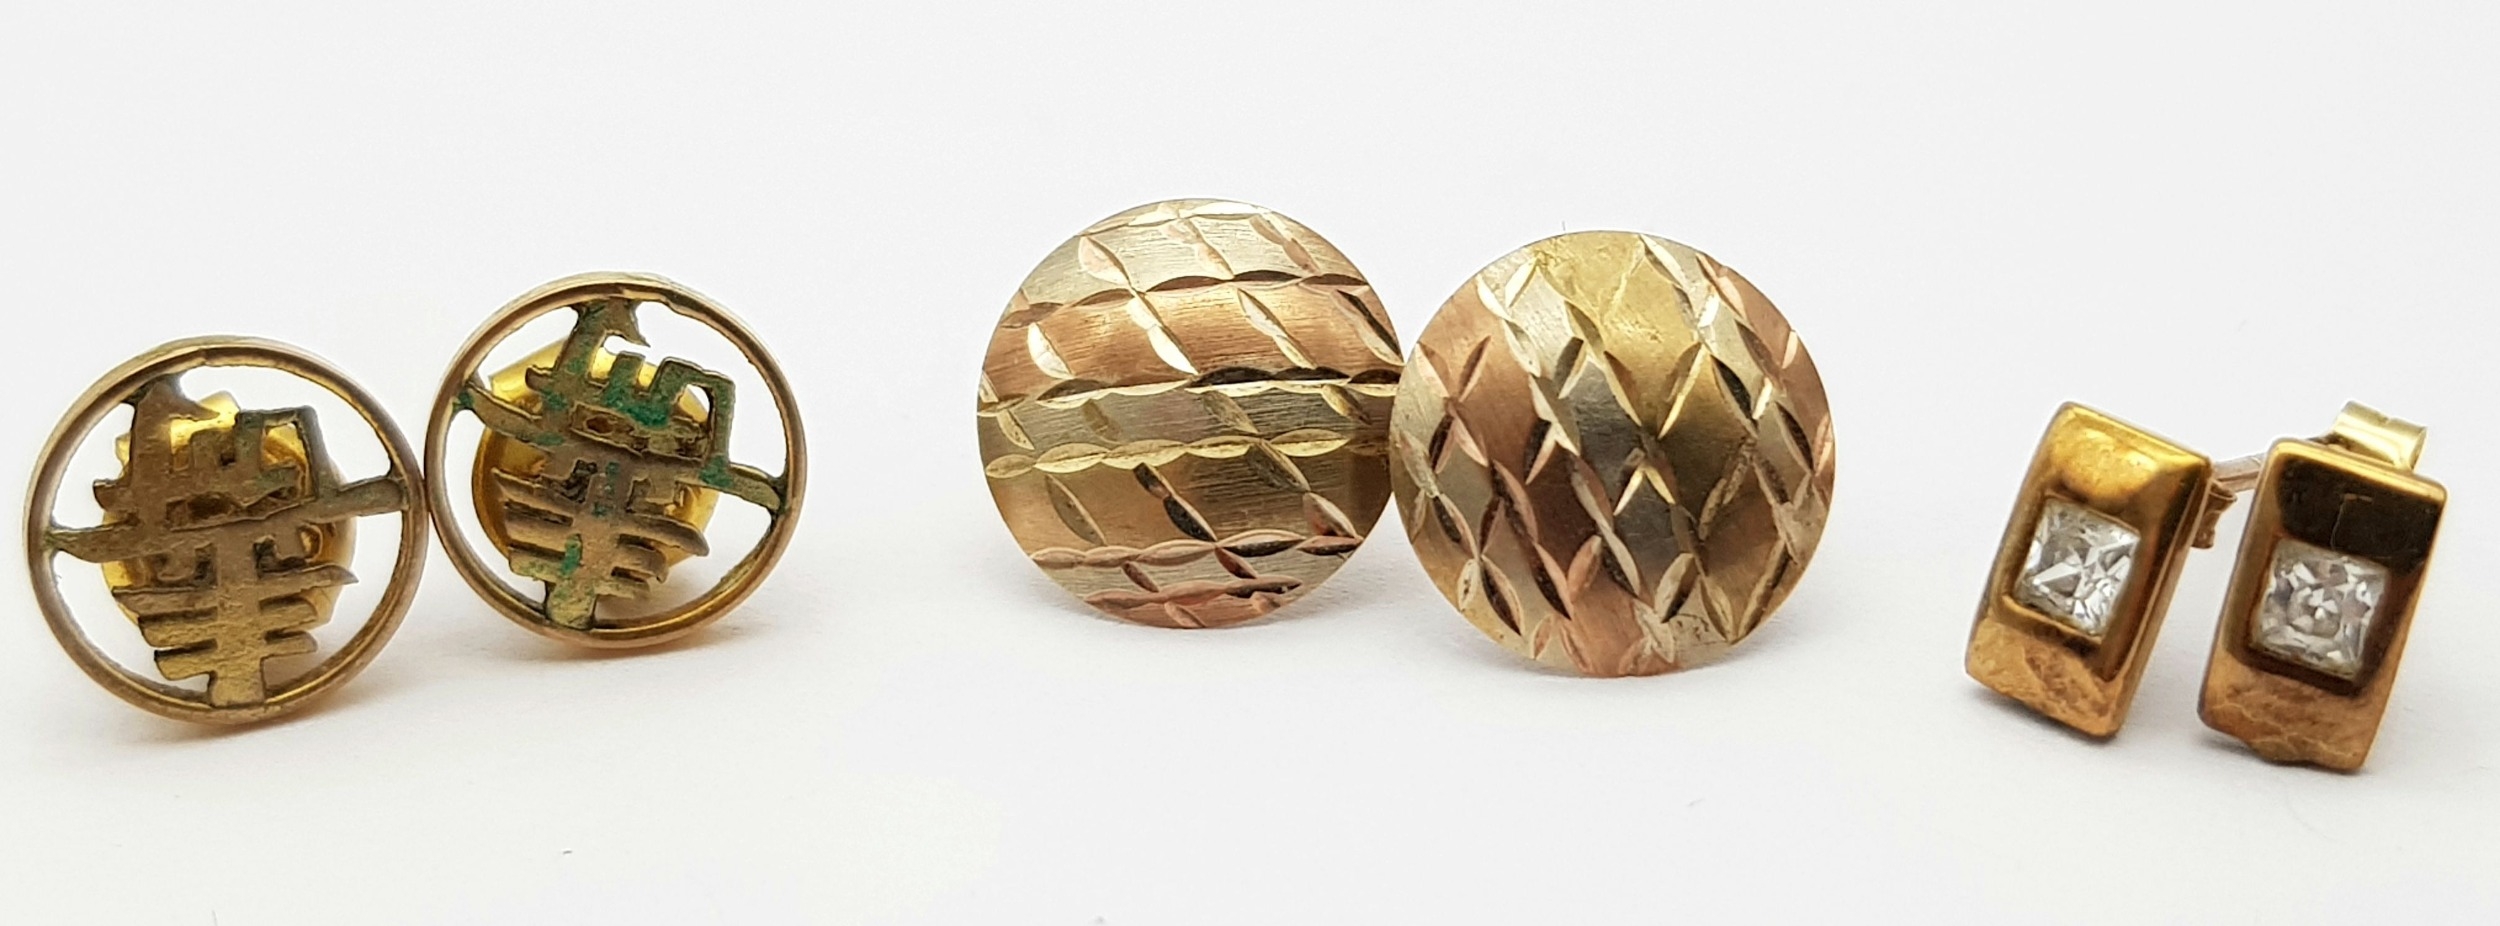 Three pairs of 9 K yellow gold stud earrings, total weight: 2.2 g